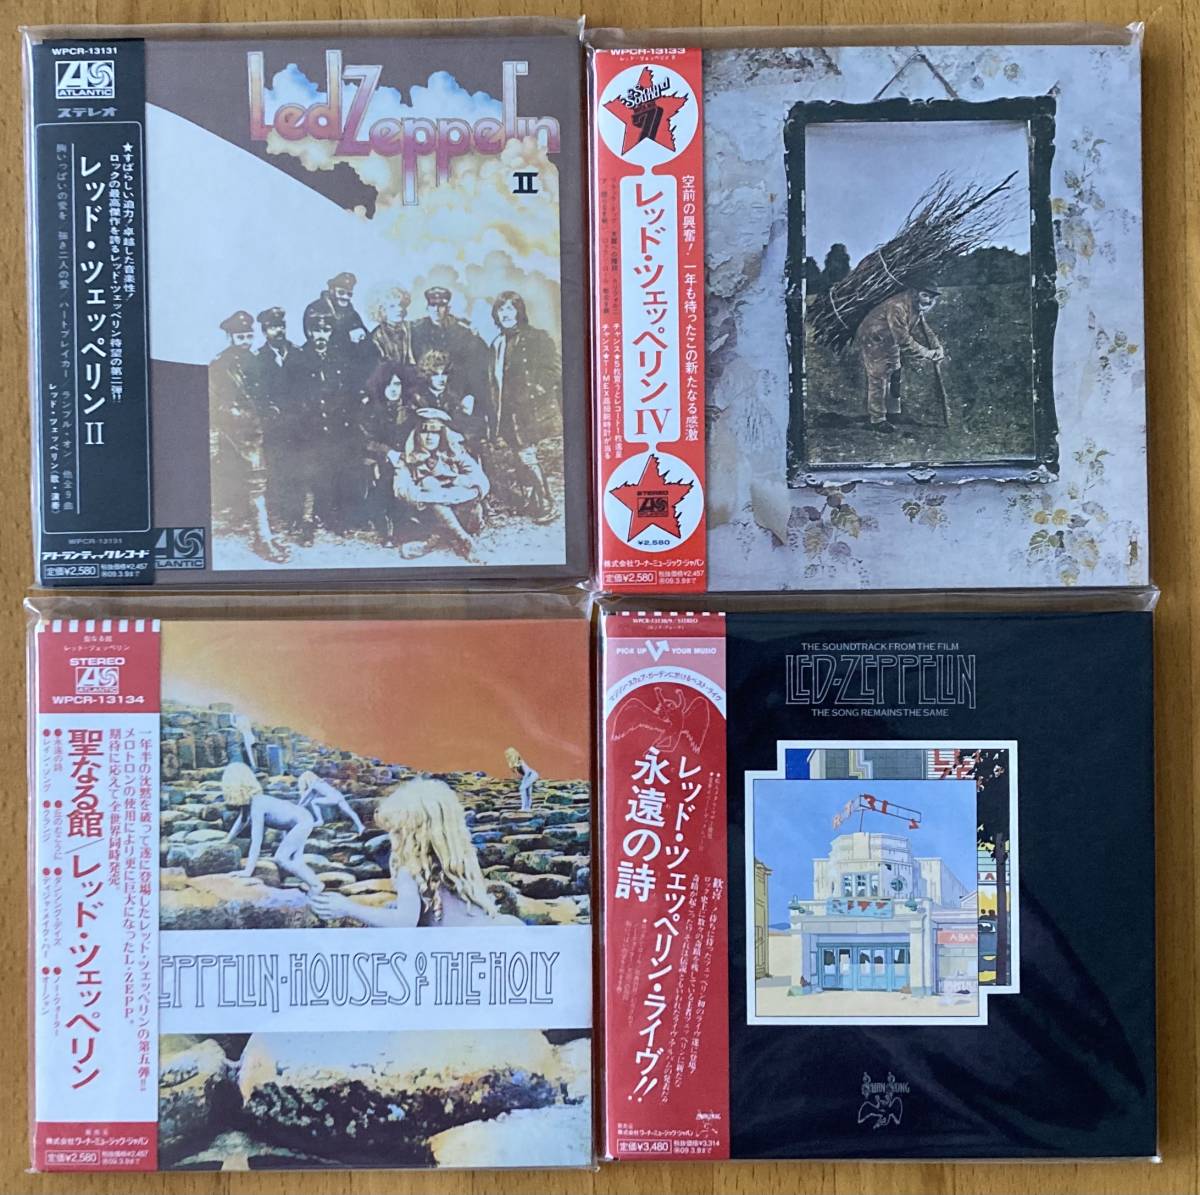  red *tsepe Lynn [Led Zeppelin] paper jacket limited papersleeve paper jacket Defi nitivu* box definitive collection